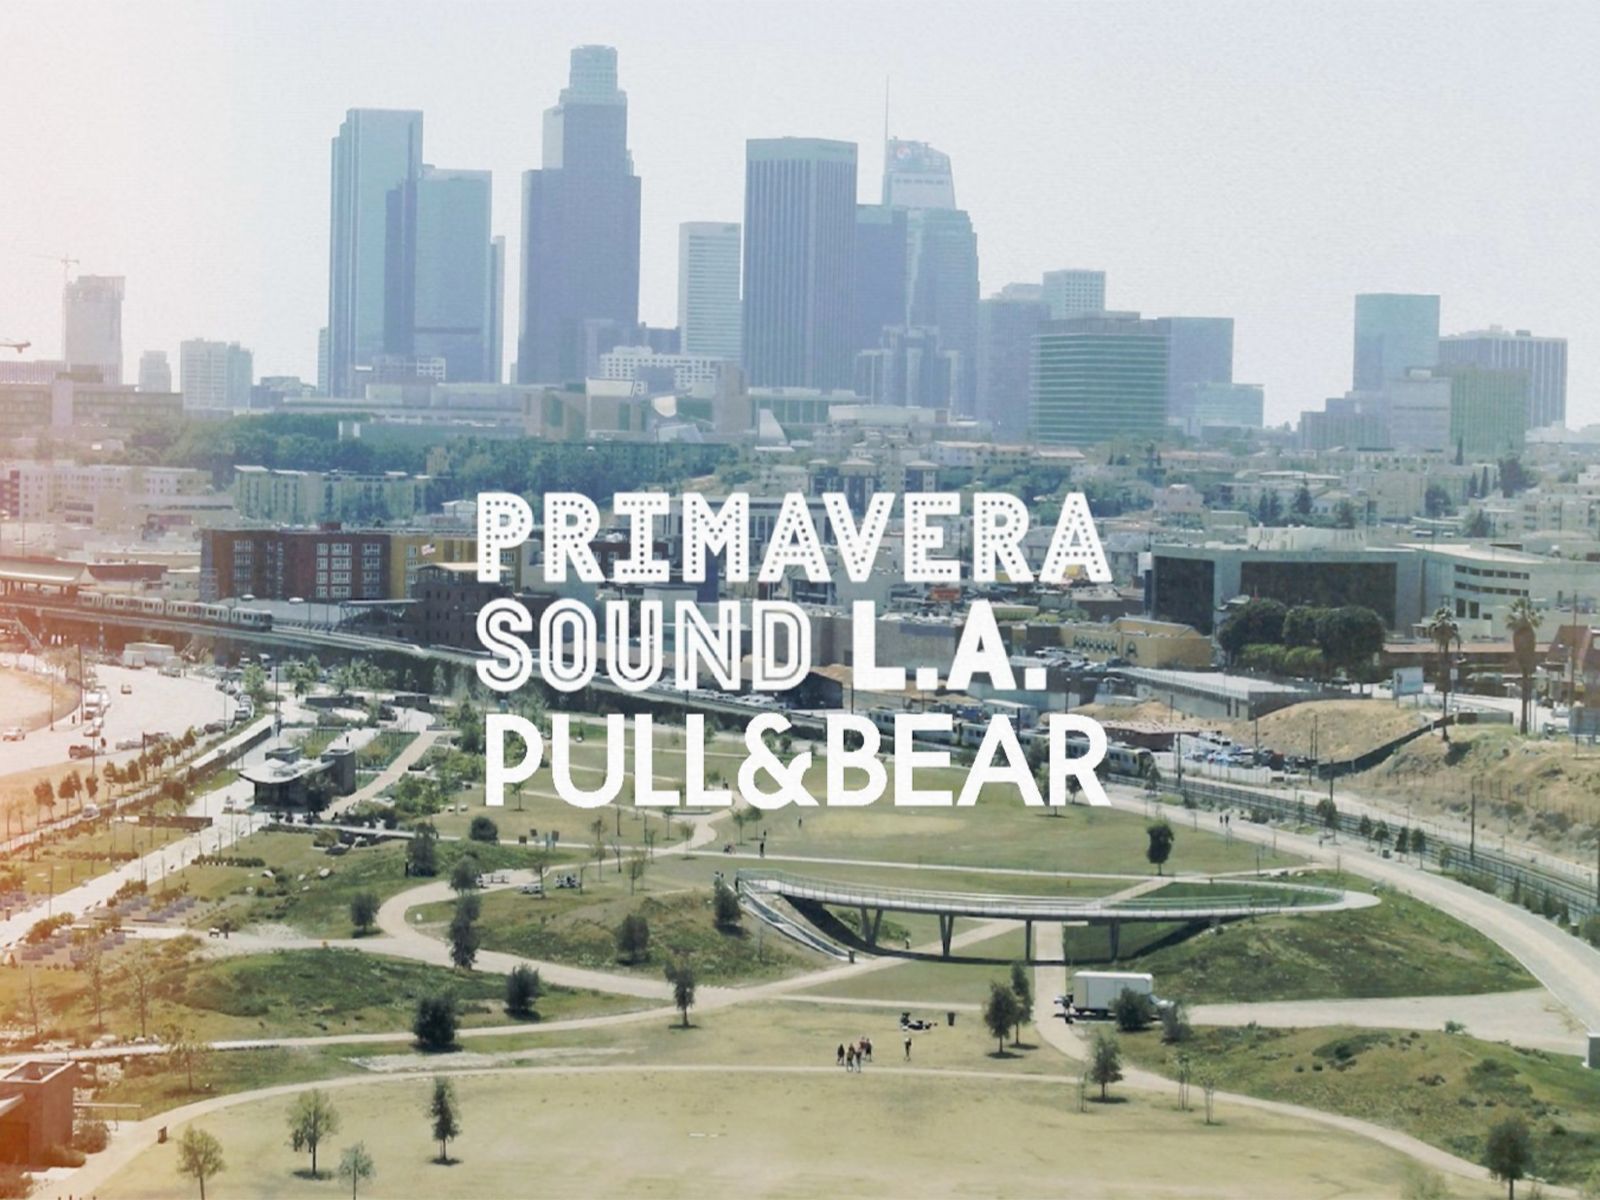 Pull&Bear comes to Primavera Sound Los Angeles for the first time